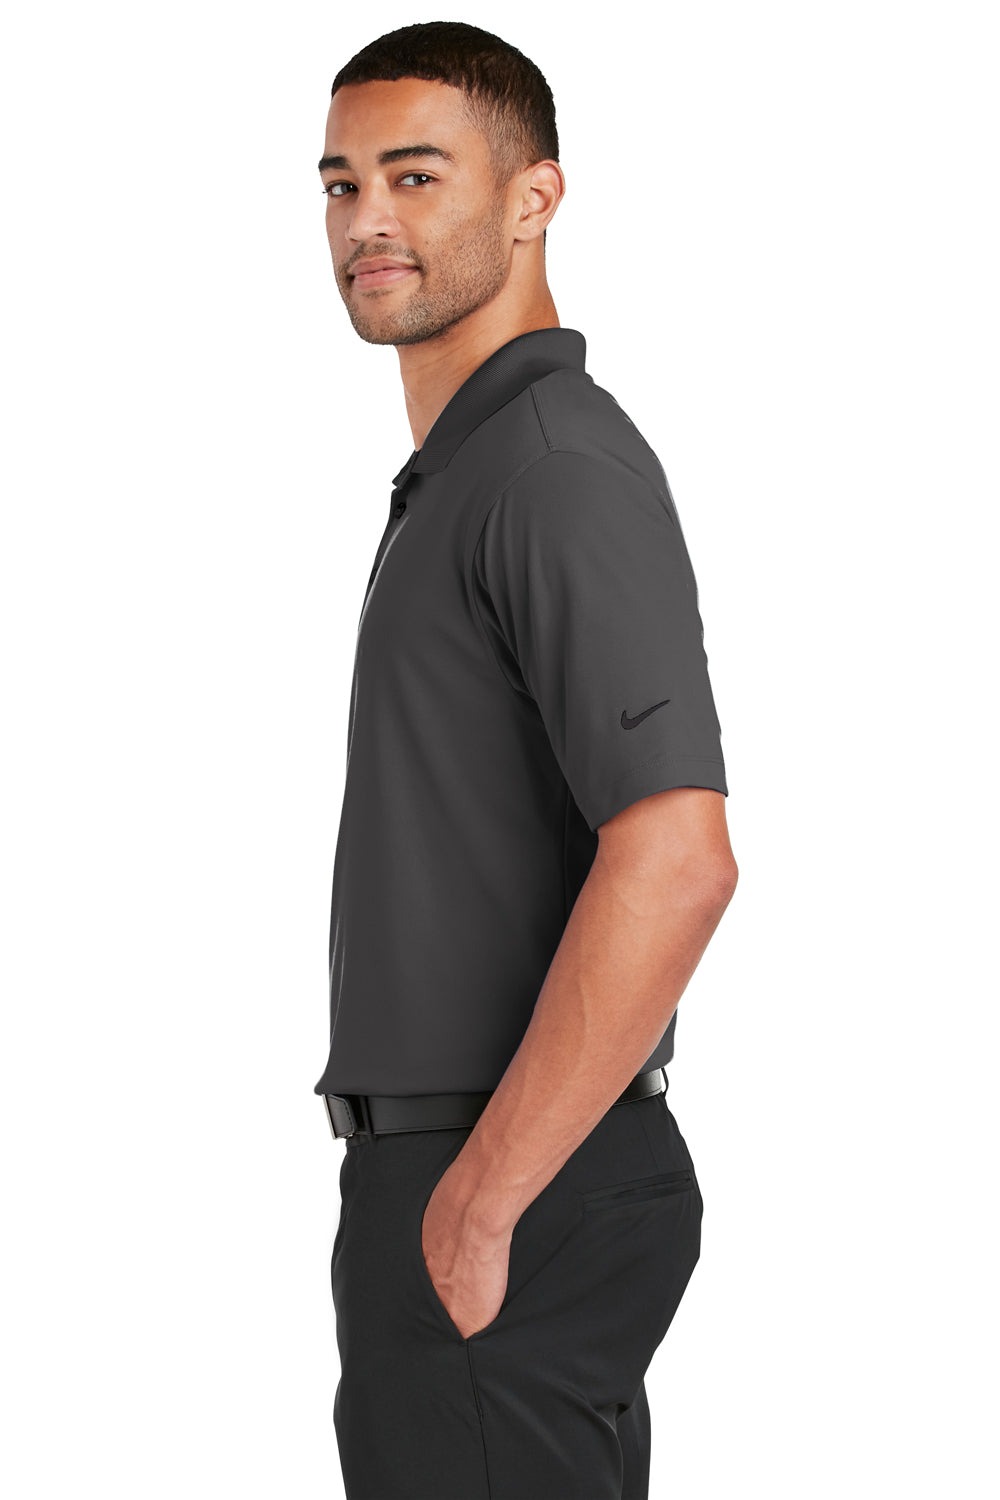 Nike 363807 Mens Dri-Fit Moisture Wicking Short Sleeve Polo Shirt Anthracite Grey Side